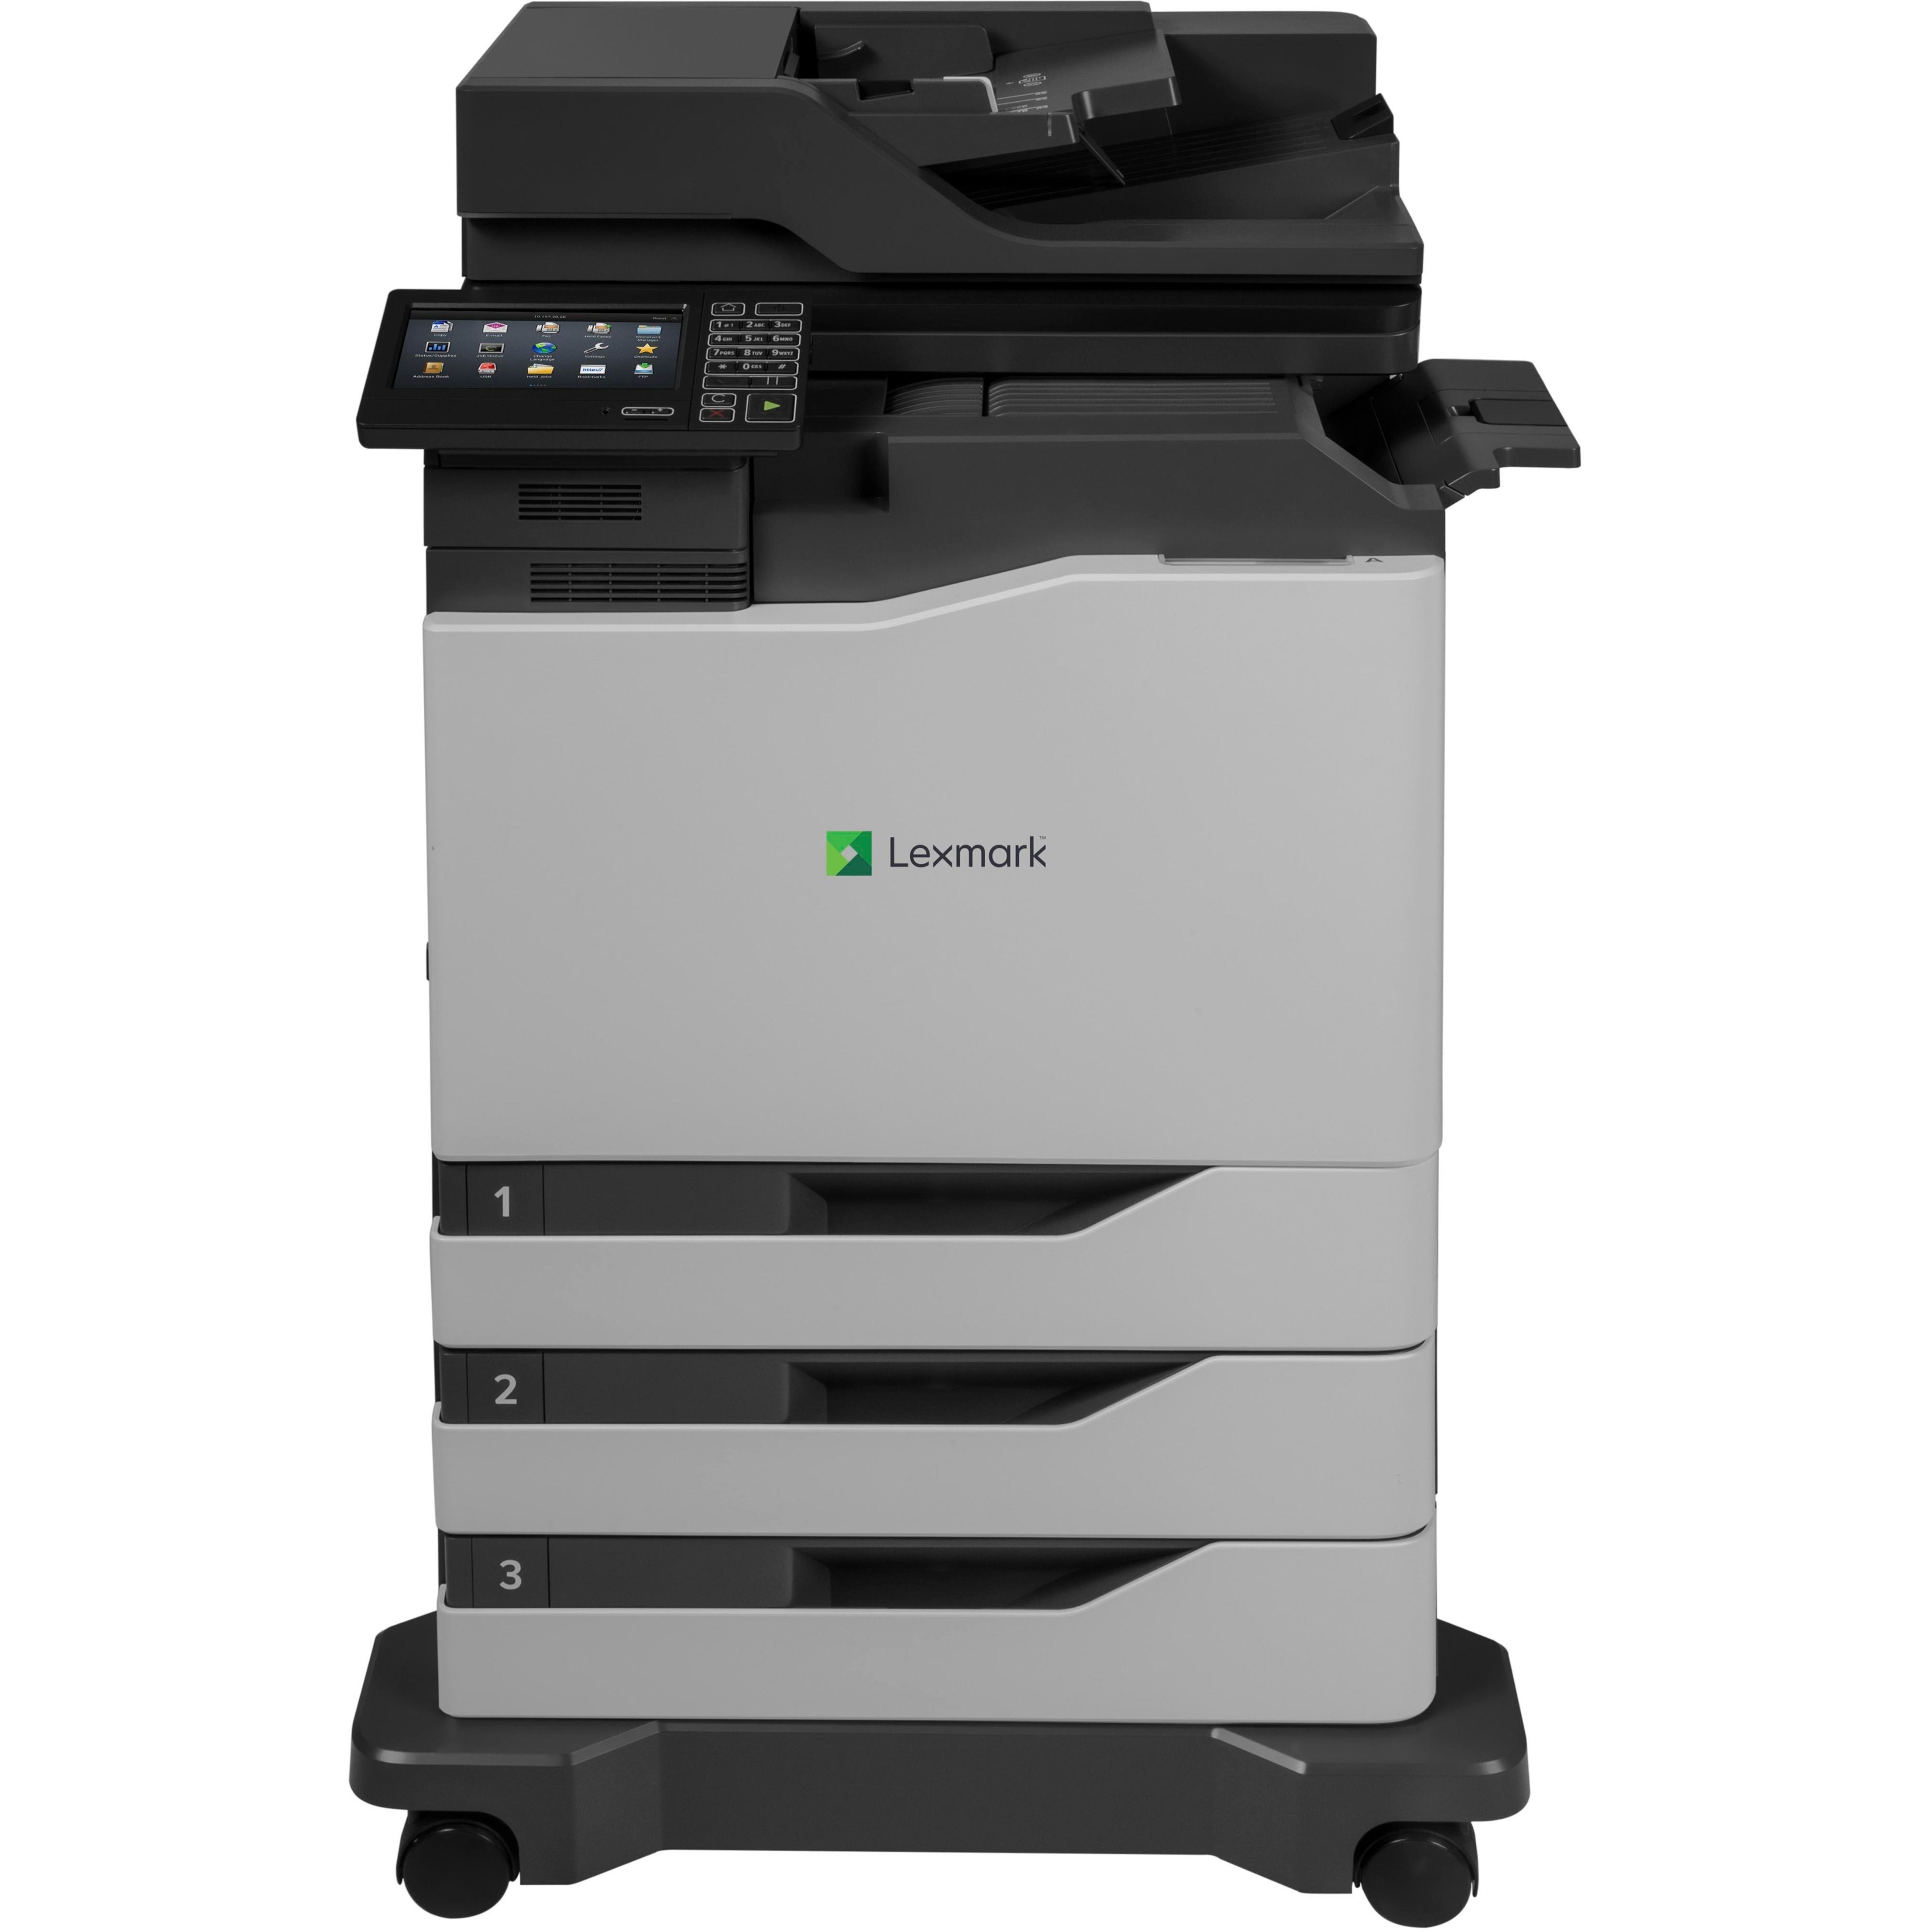 Lexmark 42K0012 CX820dtfe Colour Laser Multifunction Printer With Hard Disk, Automatic Duplex Printing, 52 ppm, 1200 x 1200 dpi